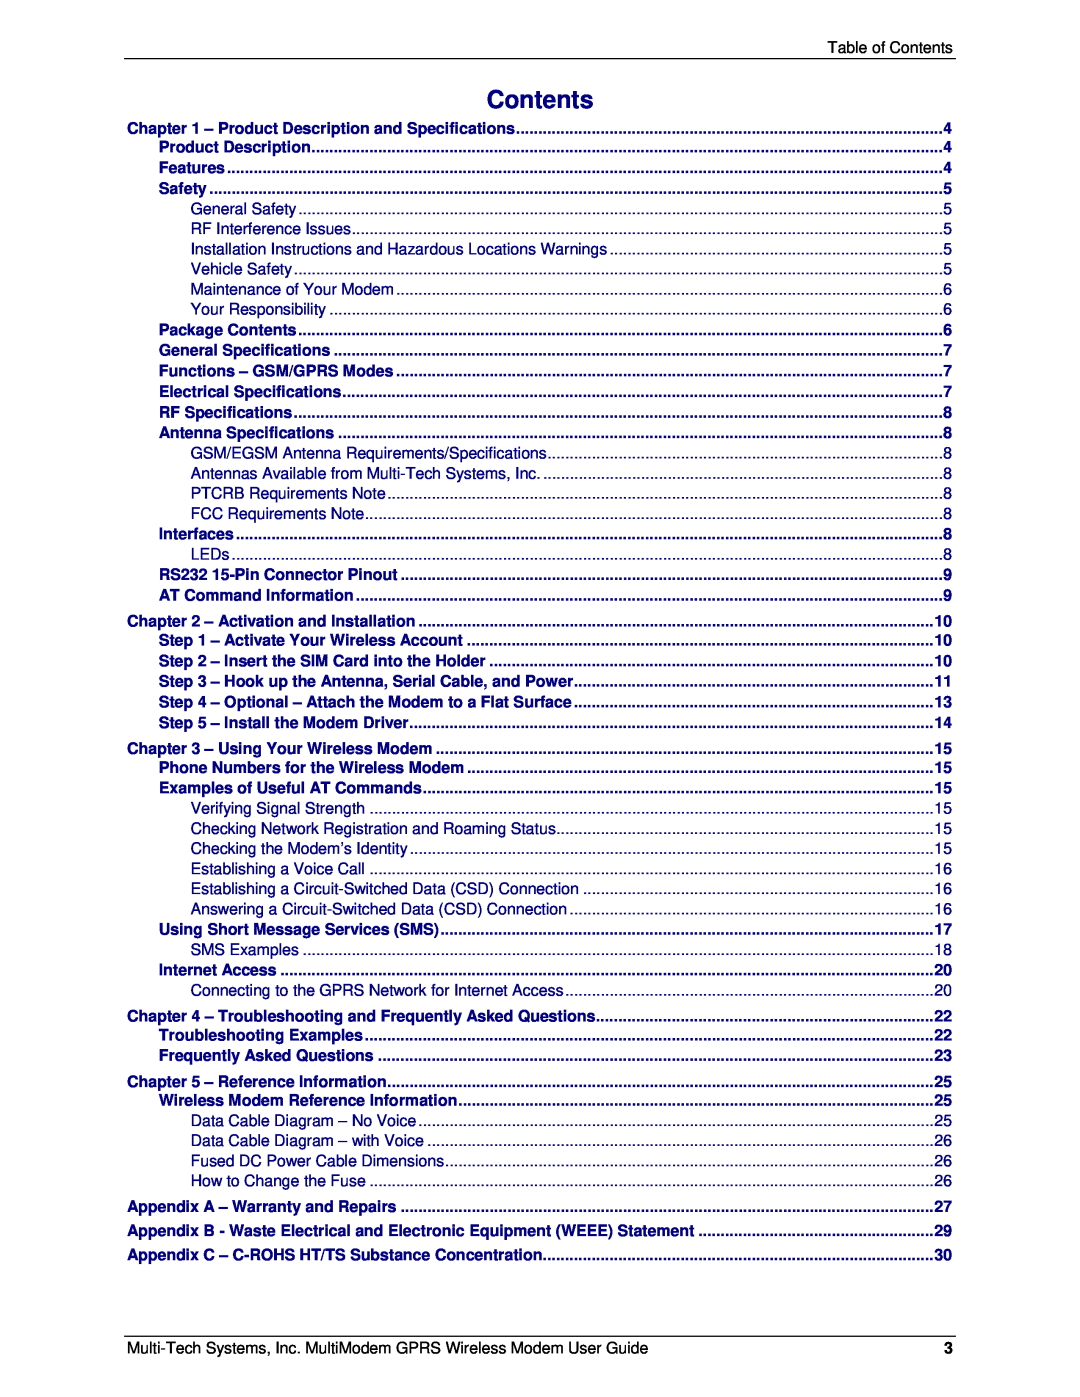 Multi-Tech Systems MTCBA-G-F4 manual Contents 